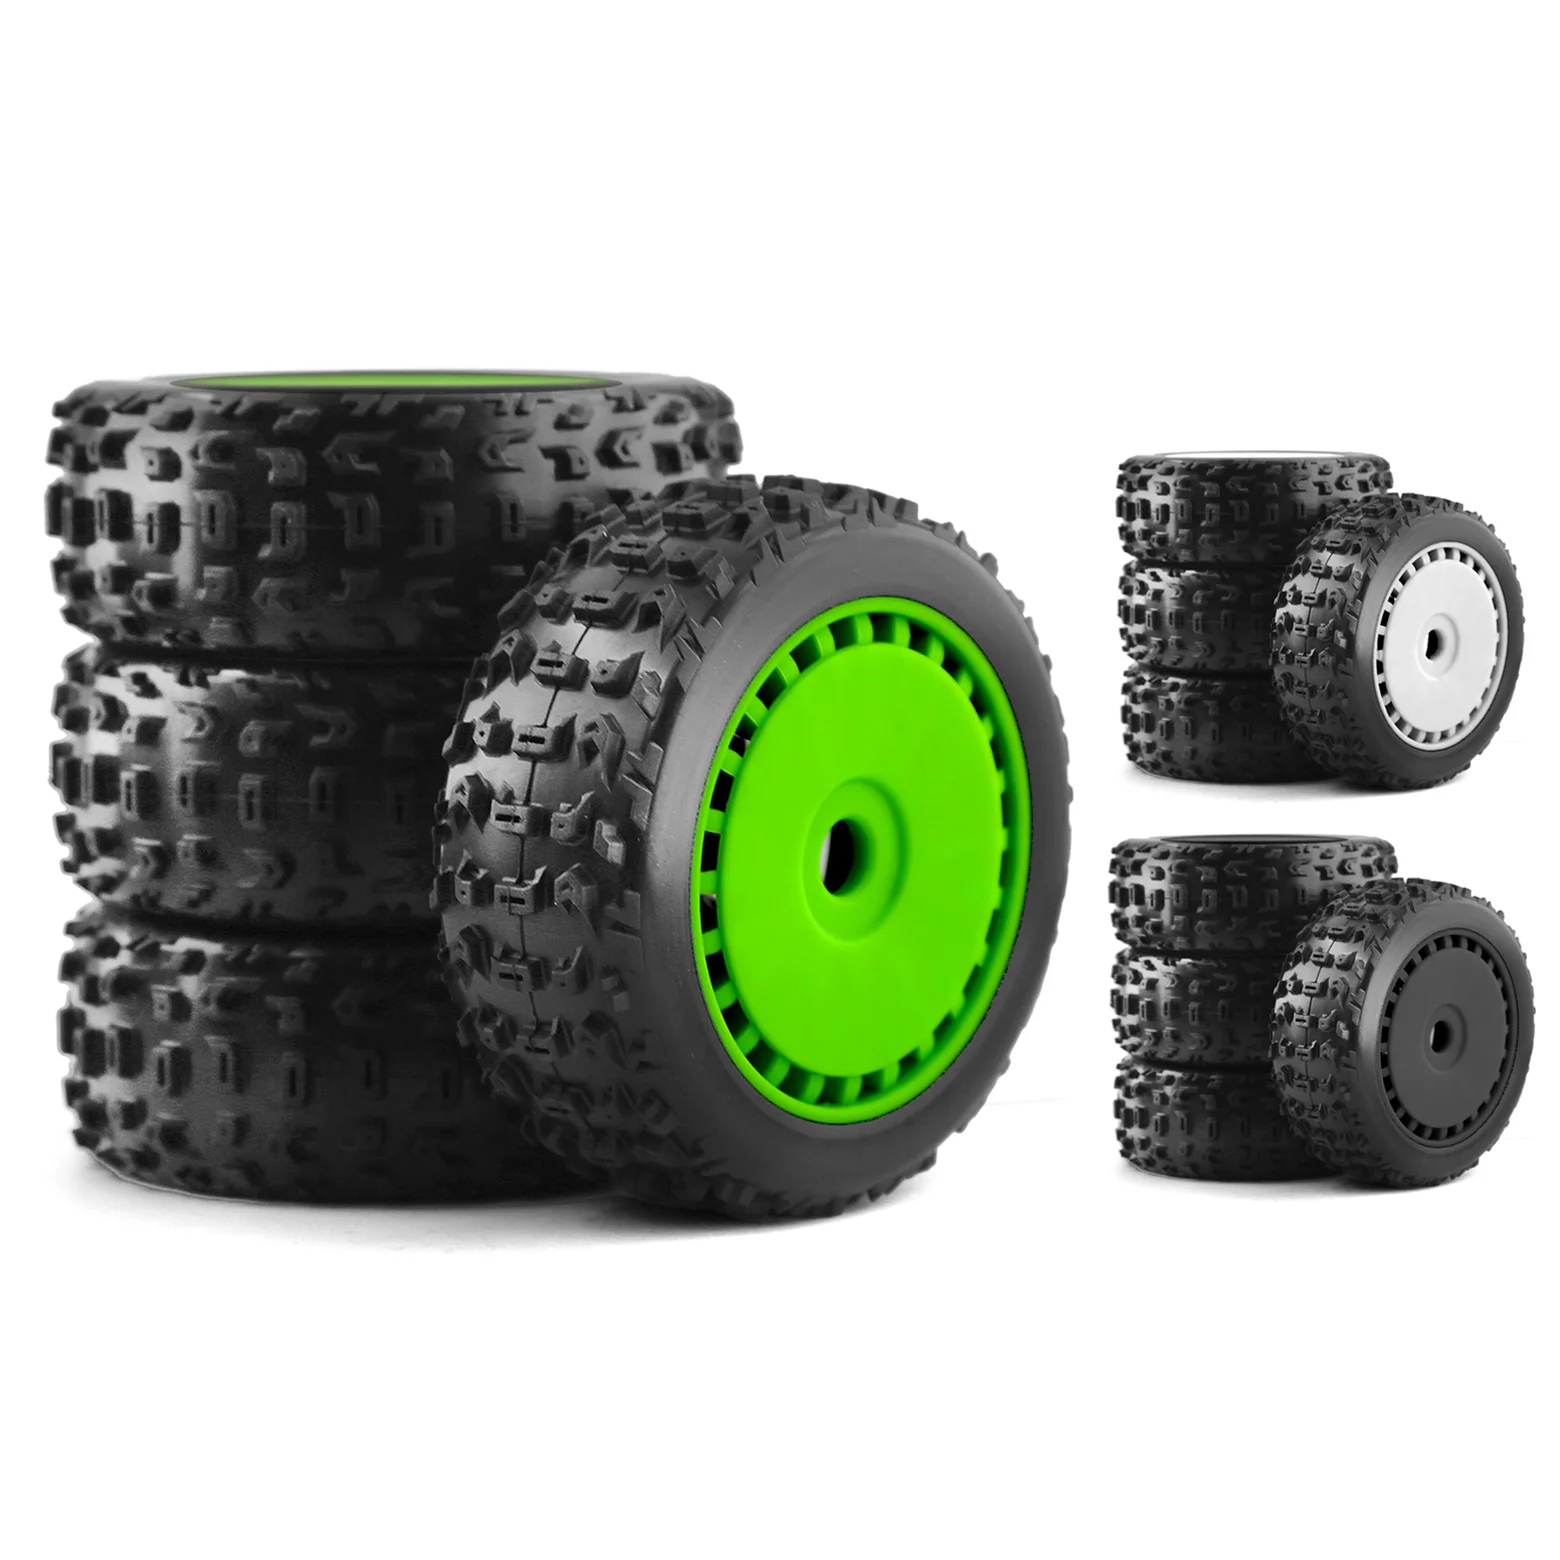 

4pcs 116mm 1/8 RC Off-Road Buggy Tires Wheel 17mm Hex for ARRMA Typhon Talion Traxxas Redcat Team Losi Kyosho HPI WR8 HSP RC Car